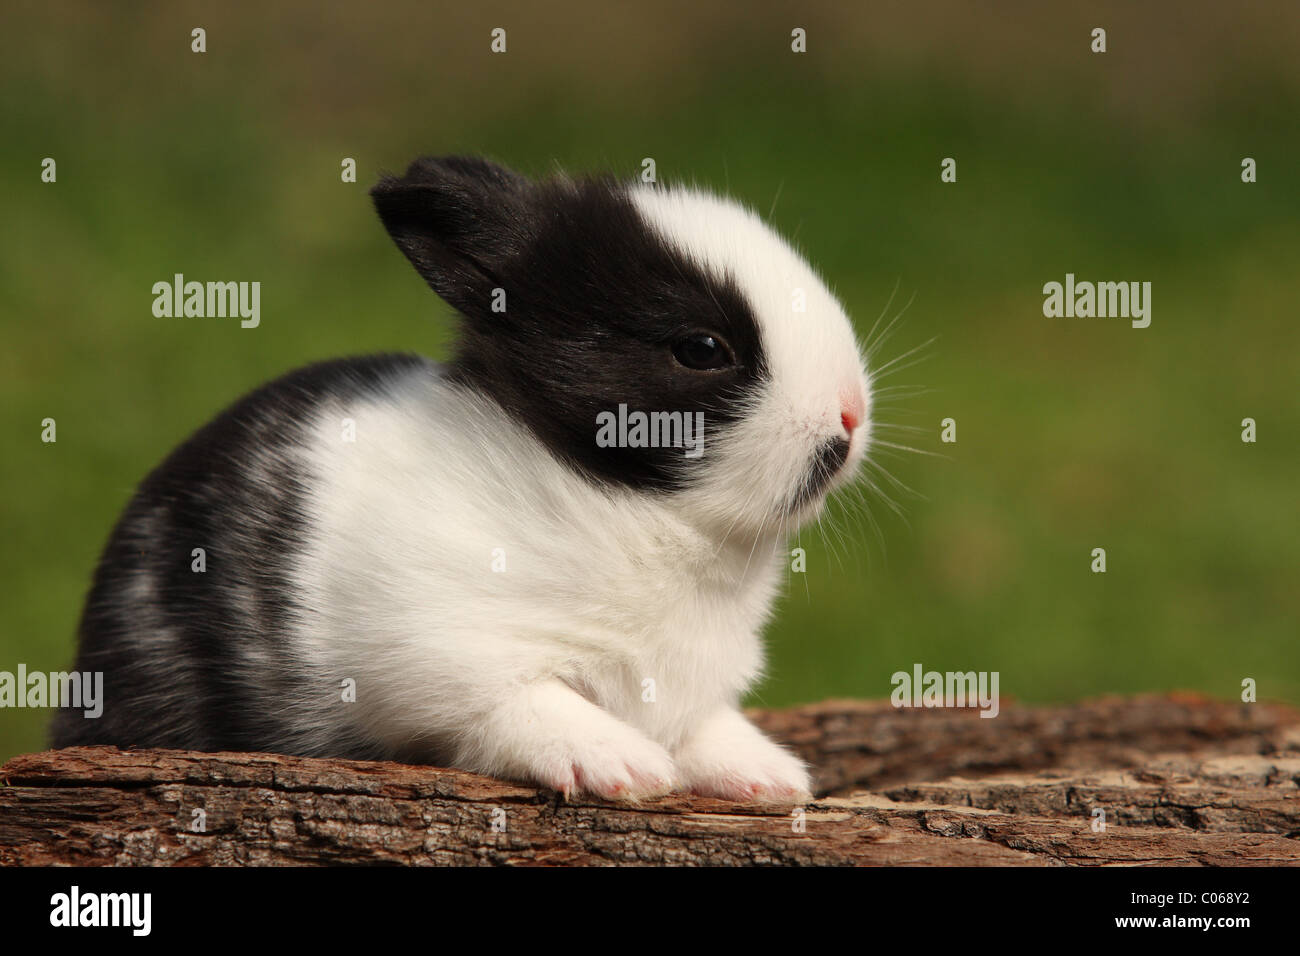 young bunny Stock Photo